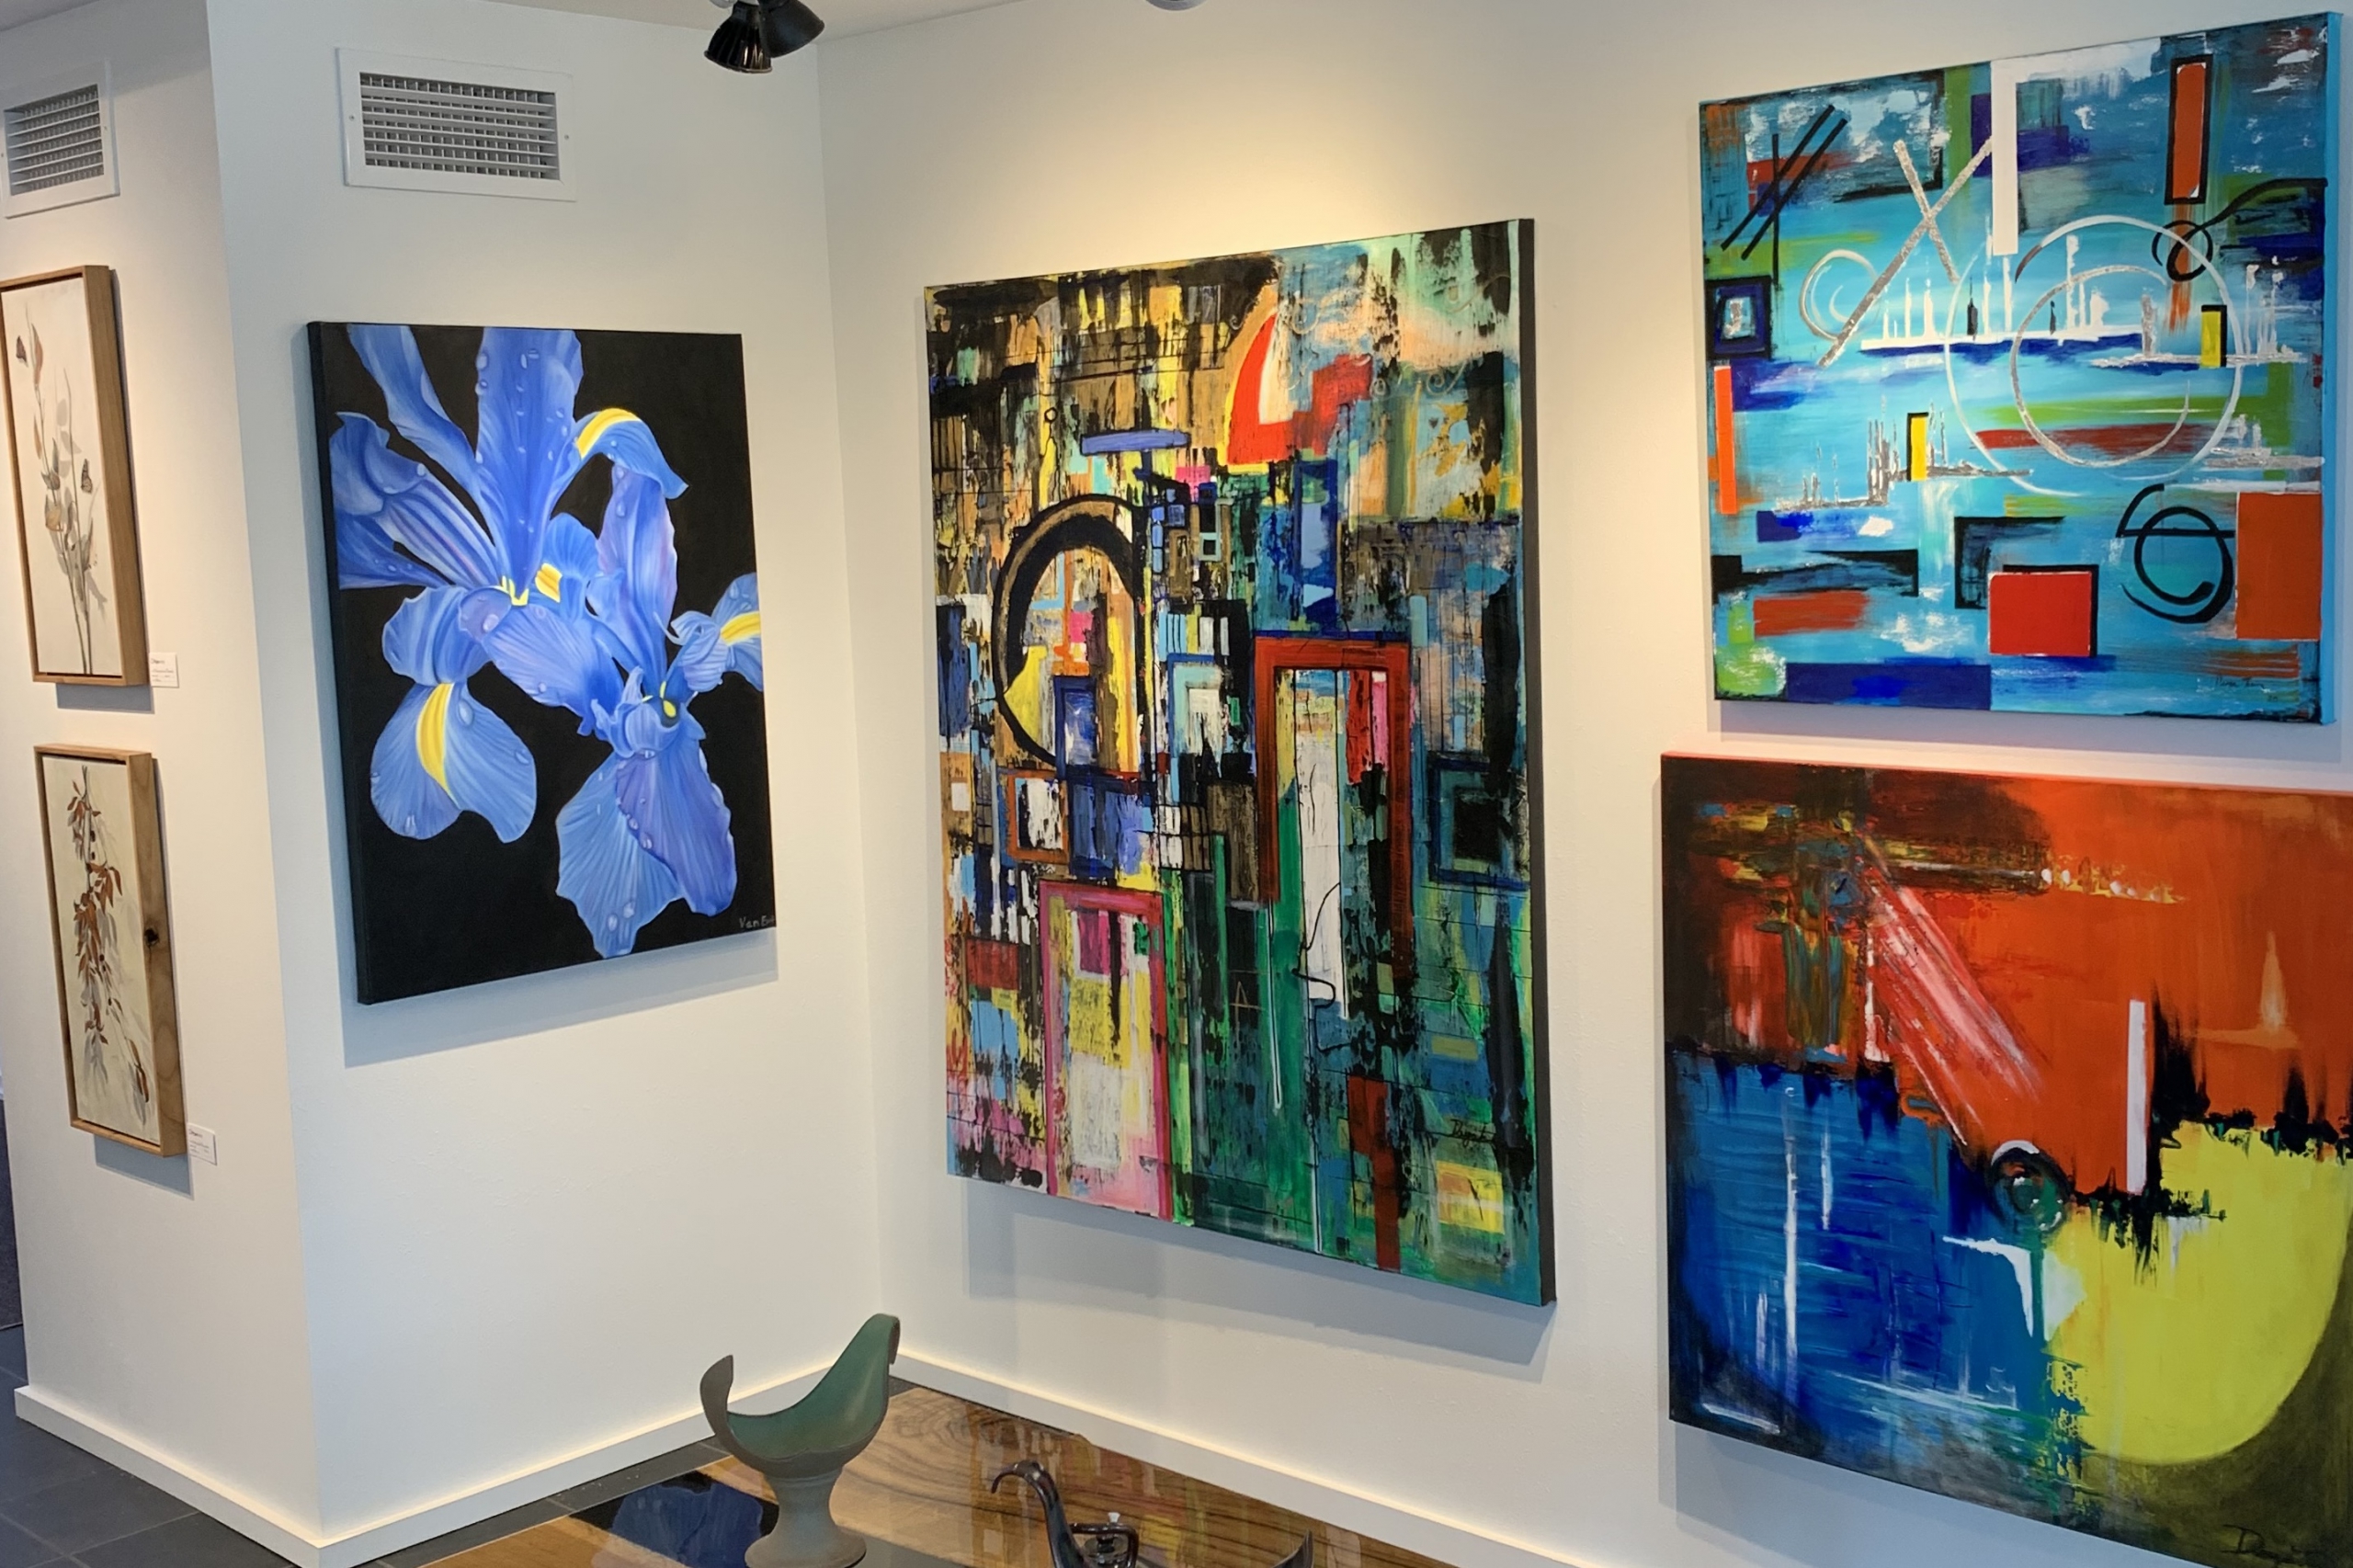 We work with a broad range of artists and styles to help you create the perfect atmosphere for your space. Shown here are original works by Kristin Gibby, Emilia Van Ert, and Deya Thorin.